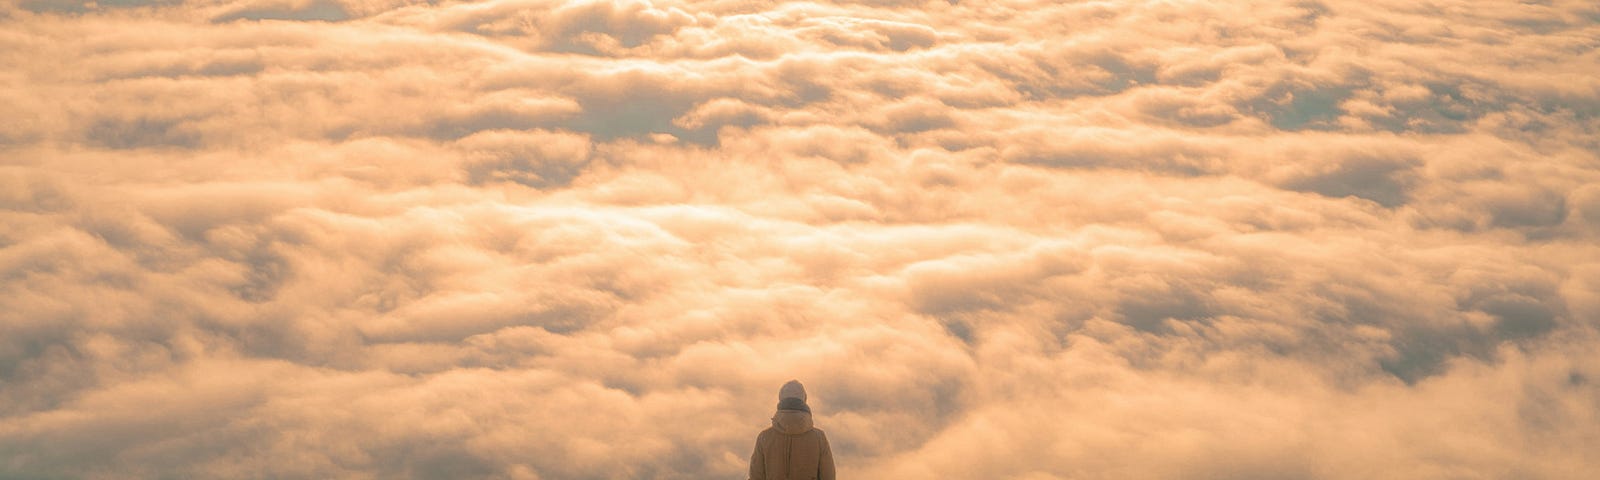 man standing on moutaintop, looking down at clouds.